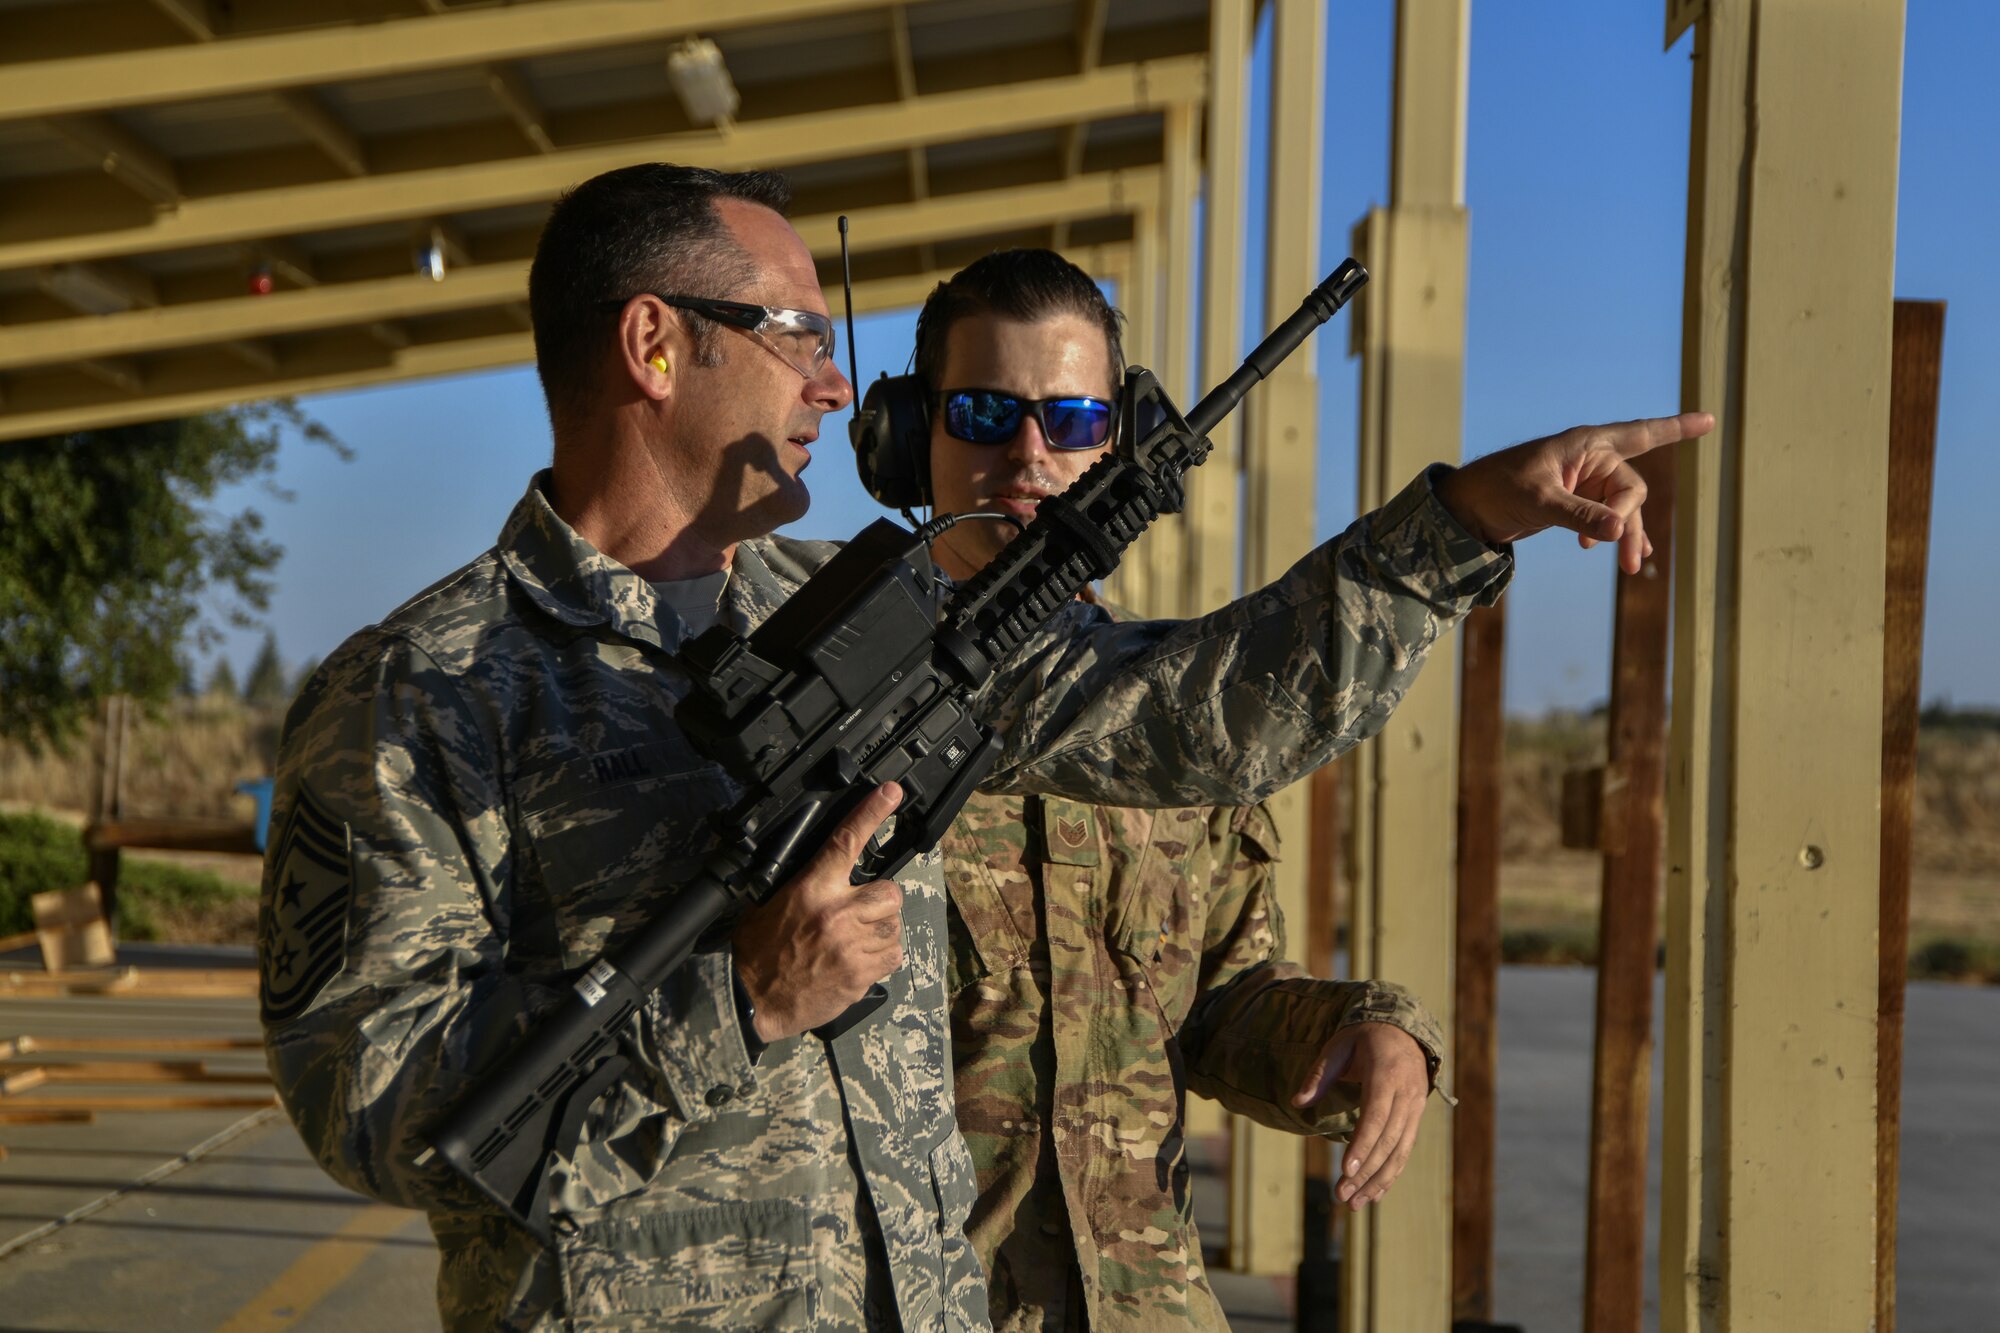 Chief Master Sgt. Dustin Hall, 9th Reconnaissance Wing command chief, receives instruction on how to use the Smart Shooter sighting device from Staff Sgt. Colton Becker, 9th Security Forces Squadron training flight, during a demonstration at Beale Air Force Base, California, Aug. 14, 2019. The 9th SFS Airmen have been using off the shelf commercial technology to help train and improve how their missions are conducted to protect the installation and the Beale AFB mission. (U.S. Air Force photo by Tech. Sgt. Alexandre Montes)